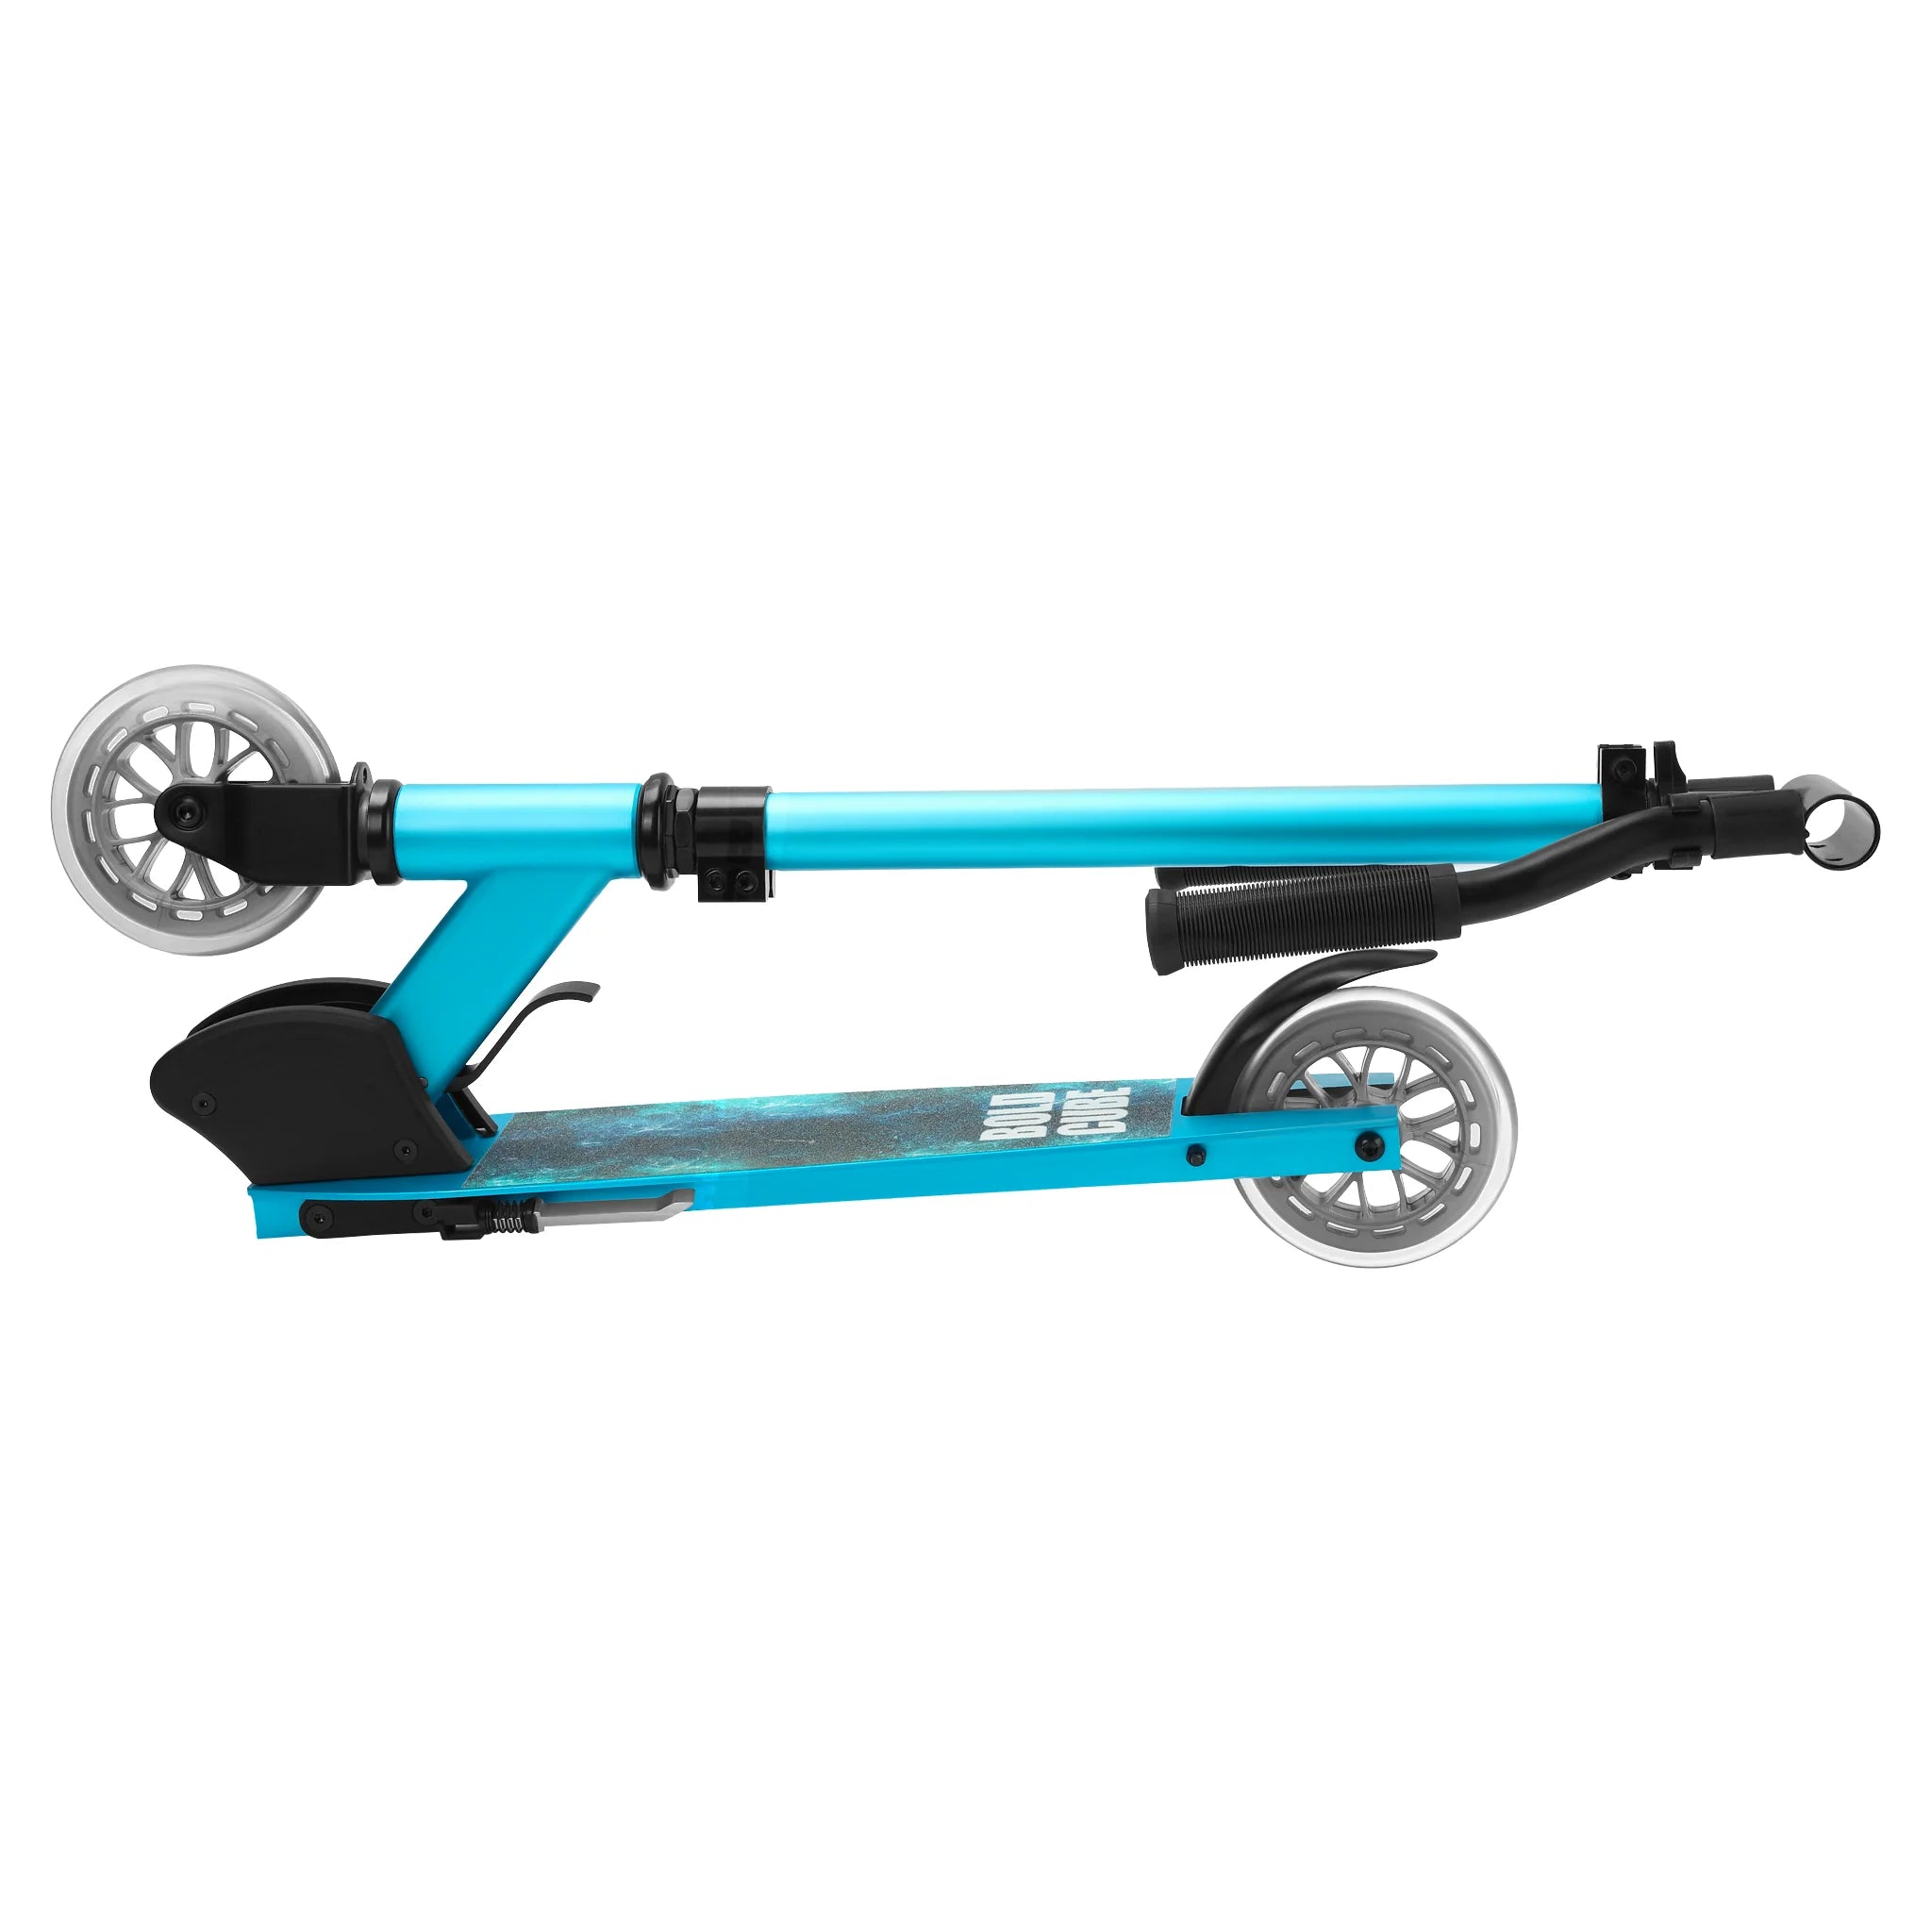 Turquoise - Deluxe 2 Wheel Scooter